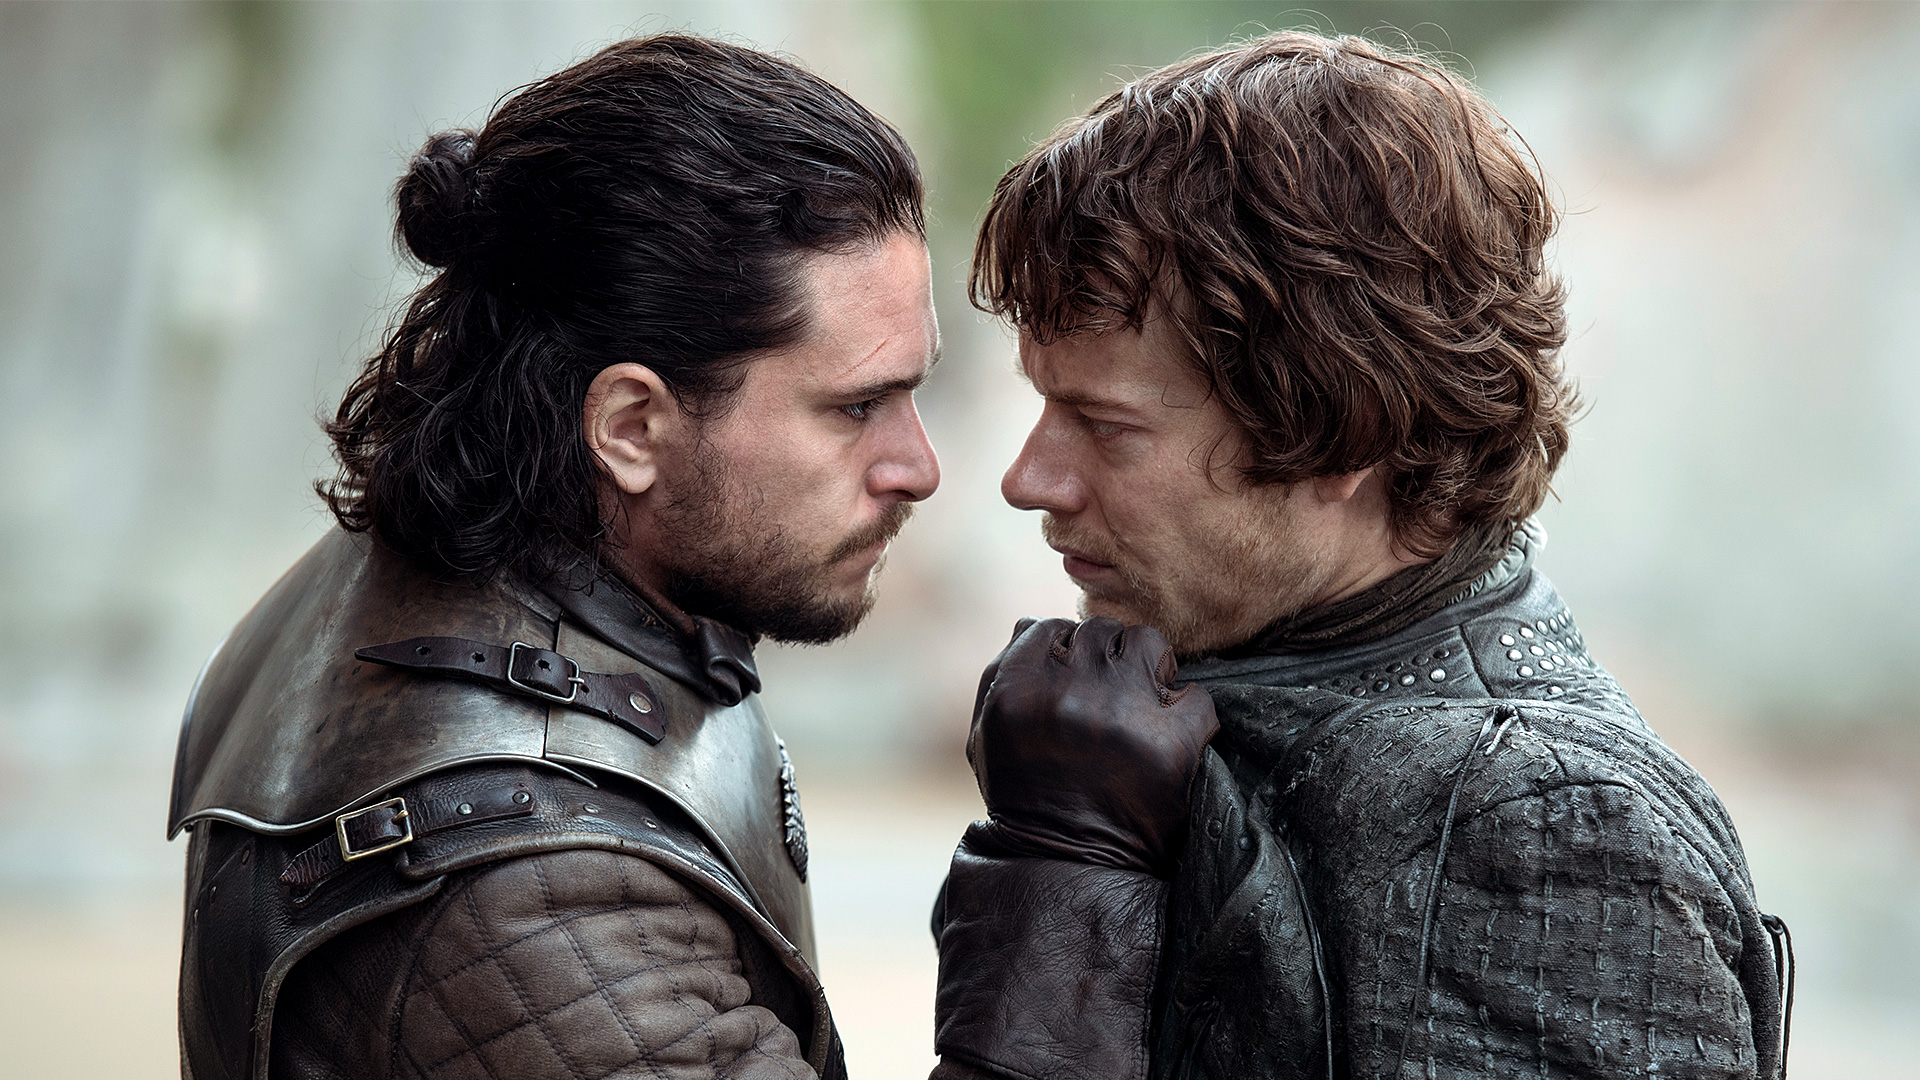 Jon Snow Theon up in each other's face like that